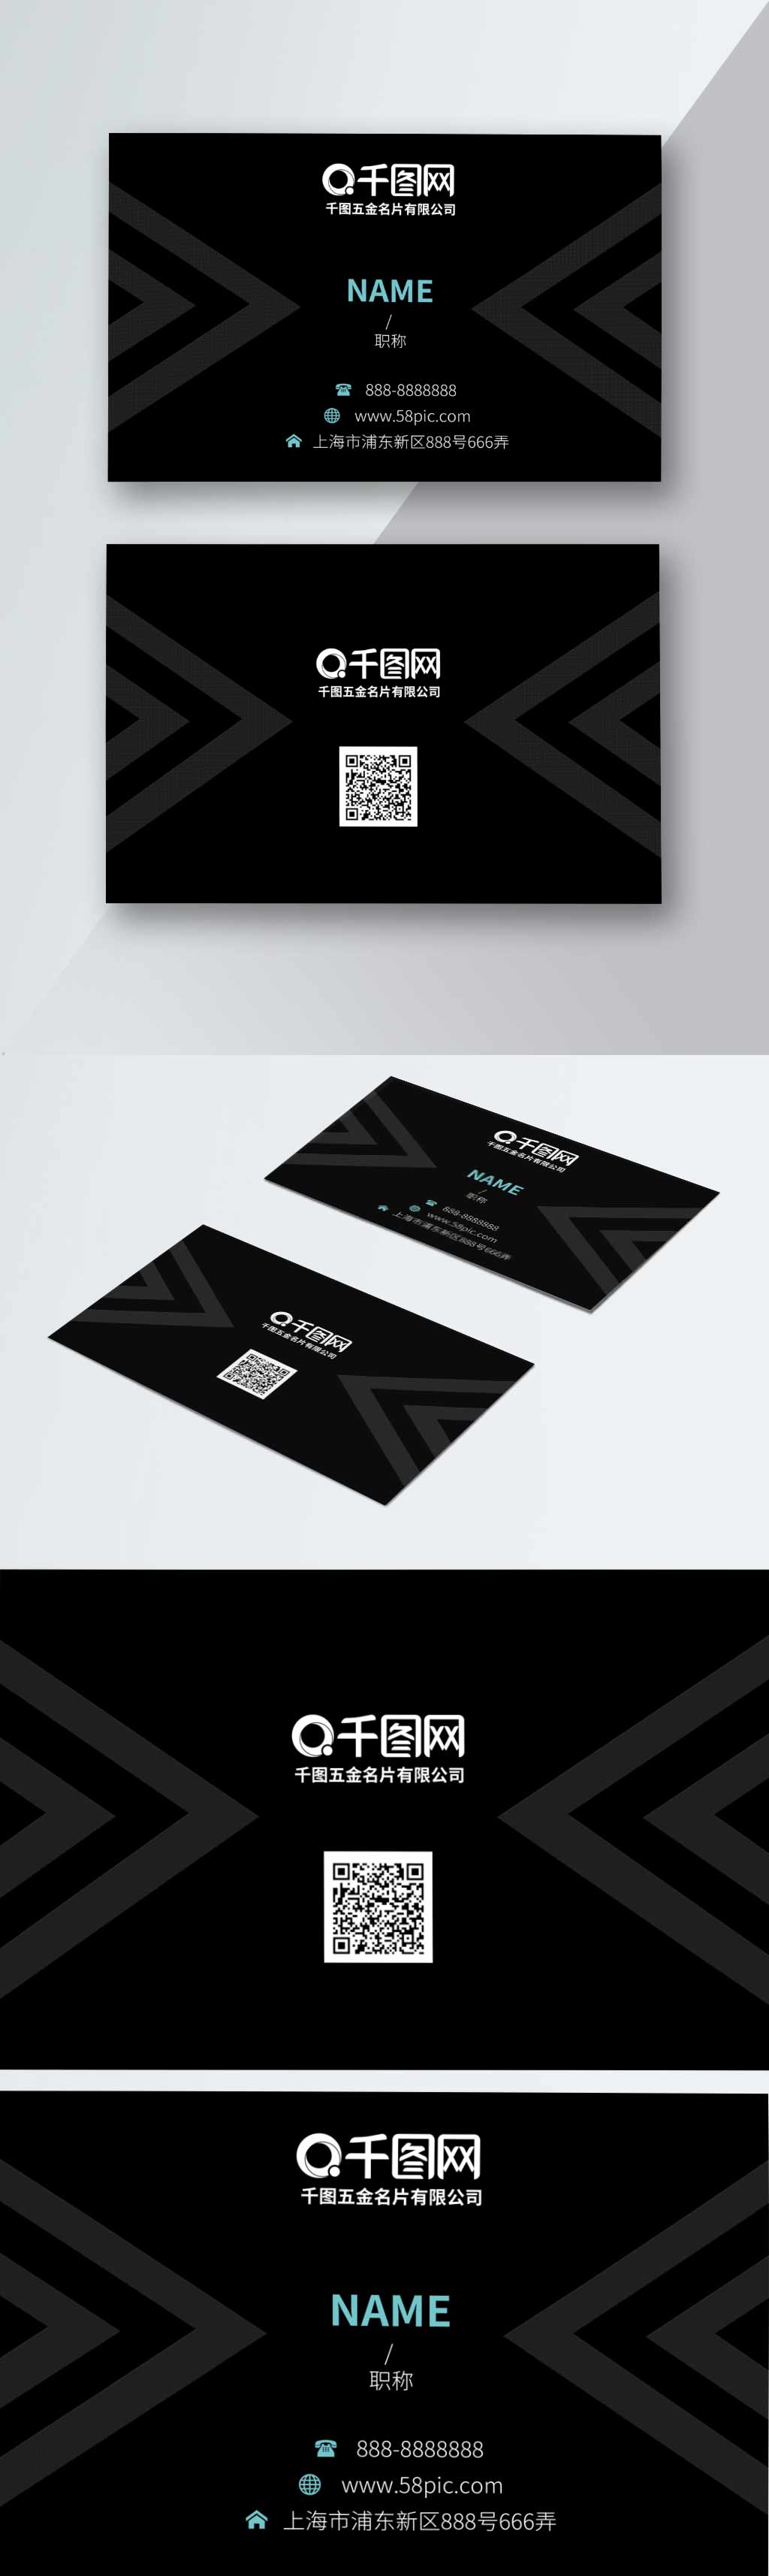 Modern hardware business card picture template image_picture free With Construction Business Card Templates Download Free